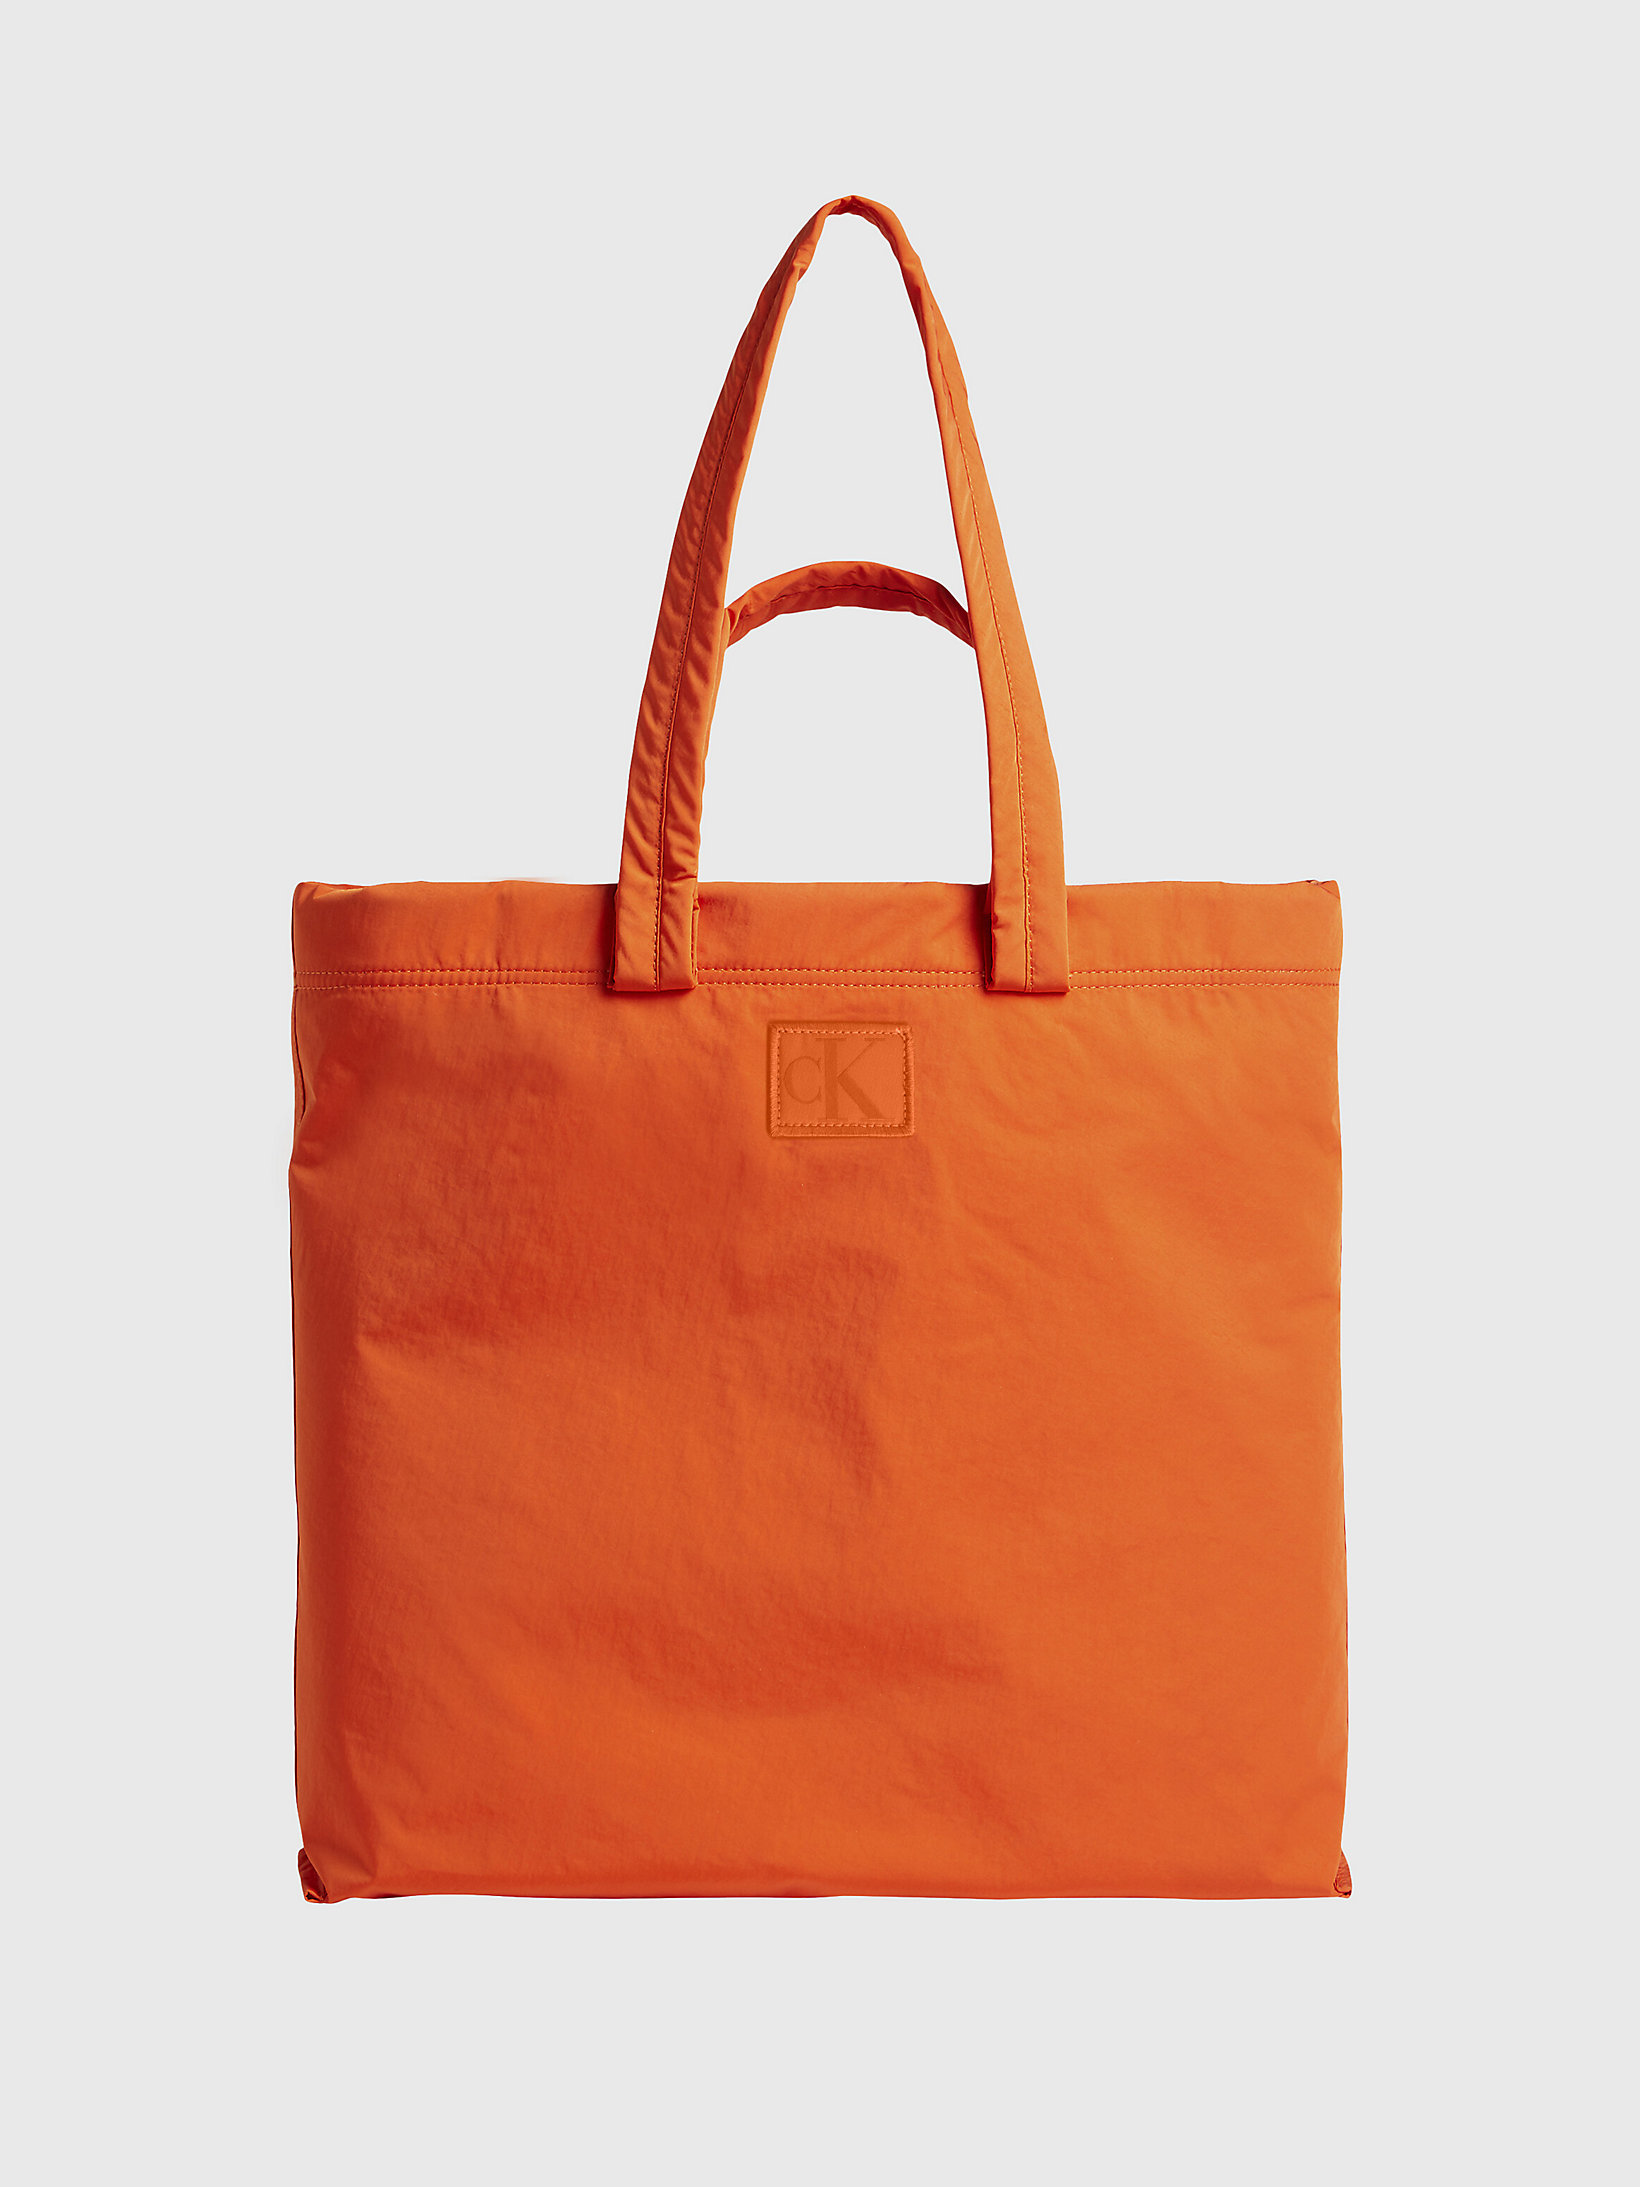 Coral Orange Recycled Nylon Reversible Tote Bag undefined women Calvin Klein